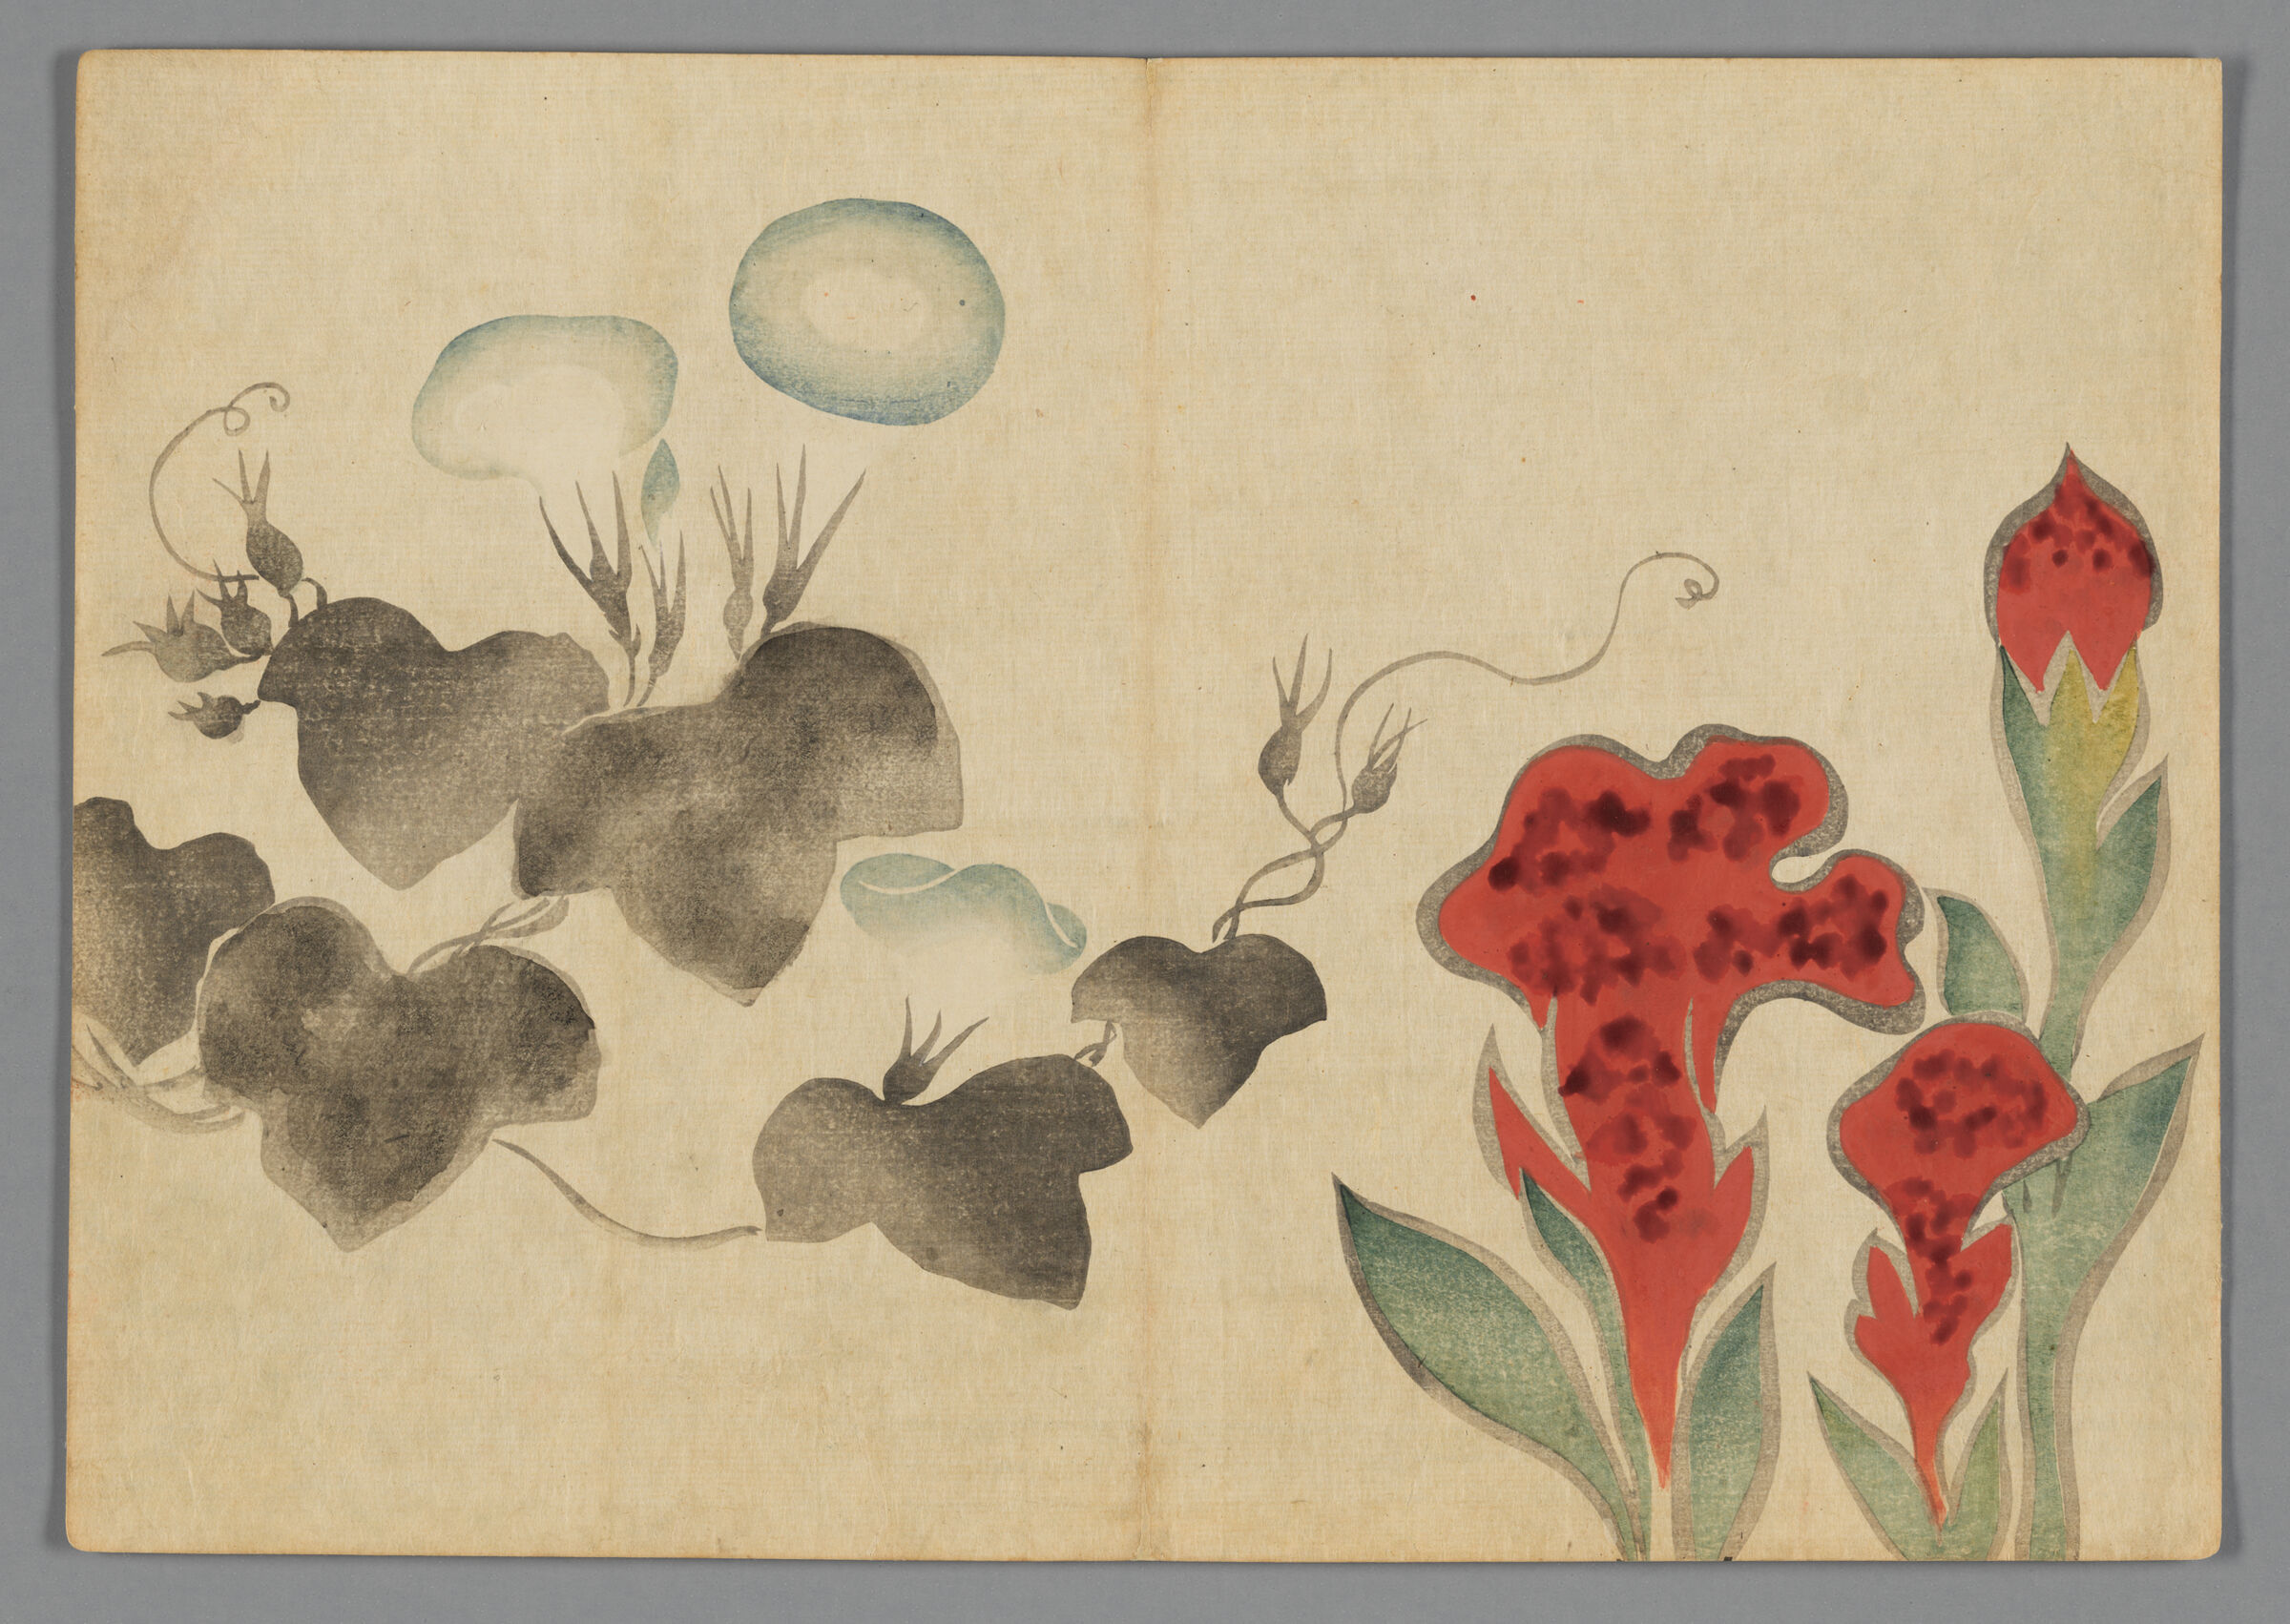 Morning Glory And Cockscomb, From The Kōrin Gafu (Kōrin Picture Album)